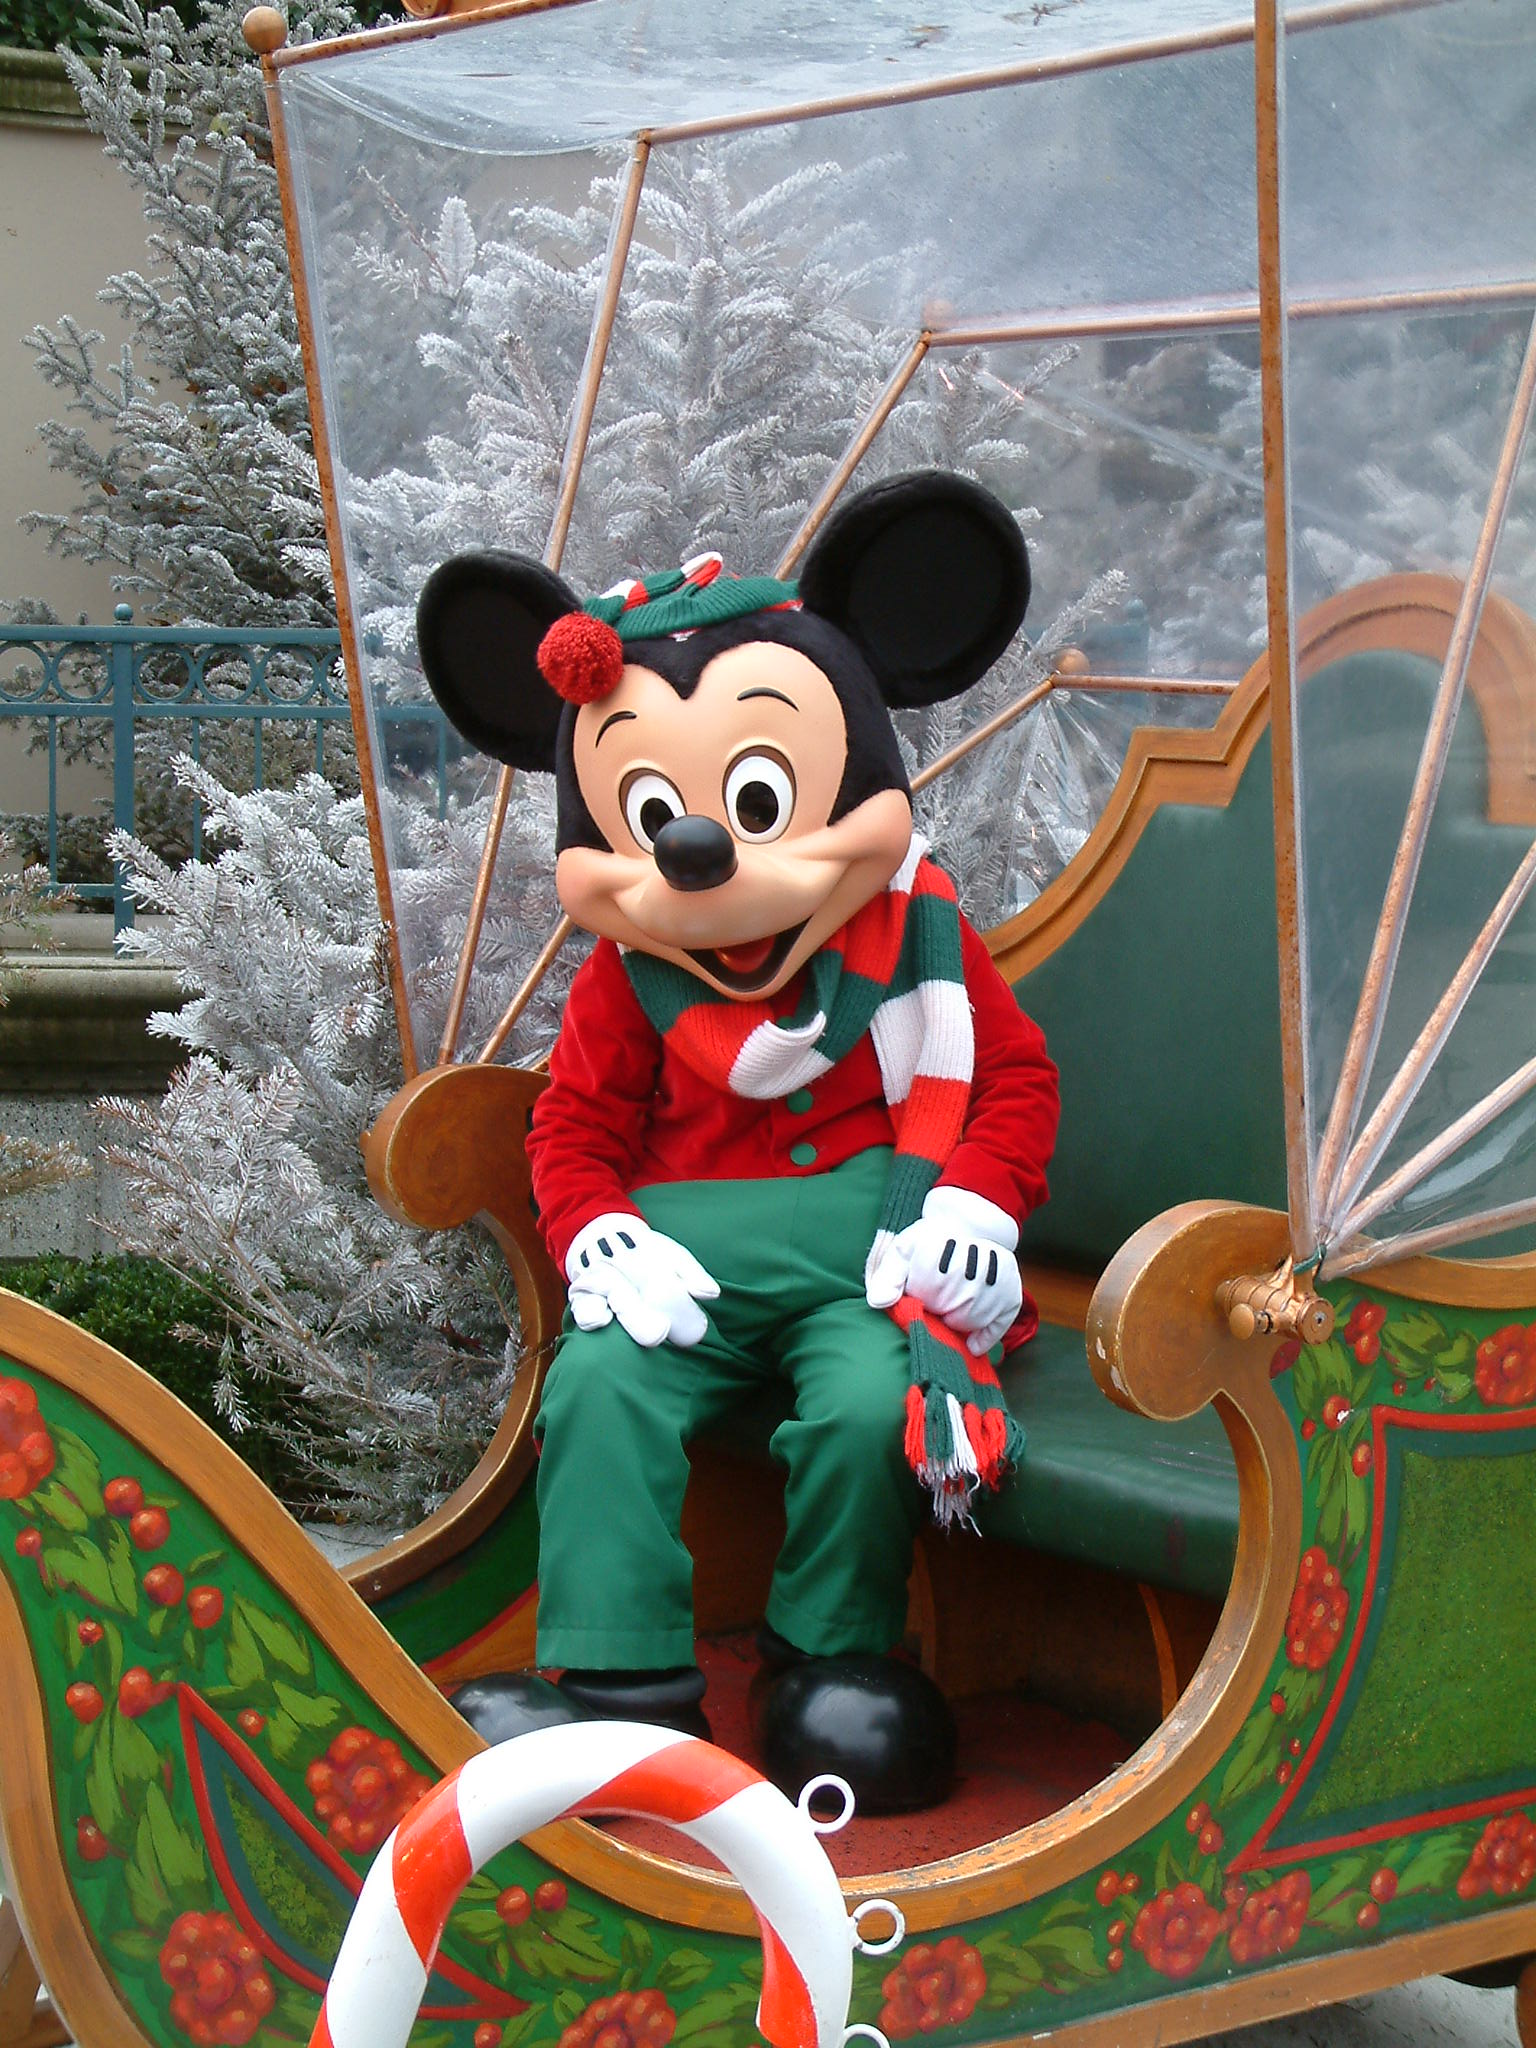 One of Mickey's many Christmas Outfits. This was at the Disneyland Park in 2004.